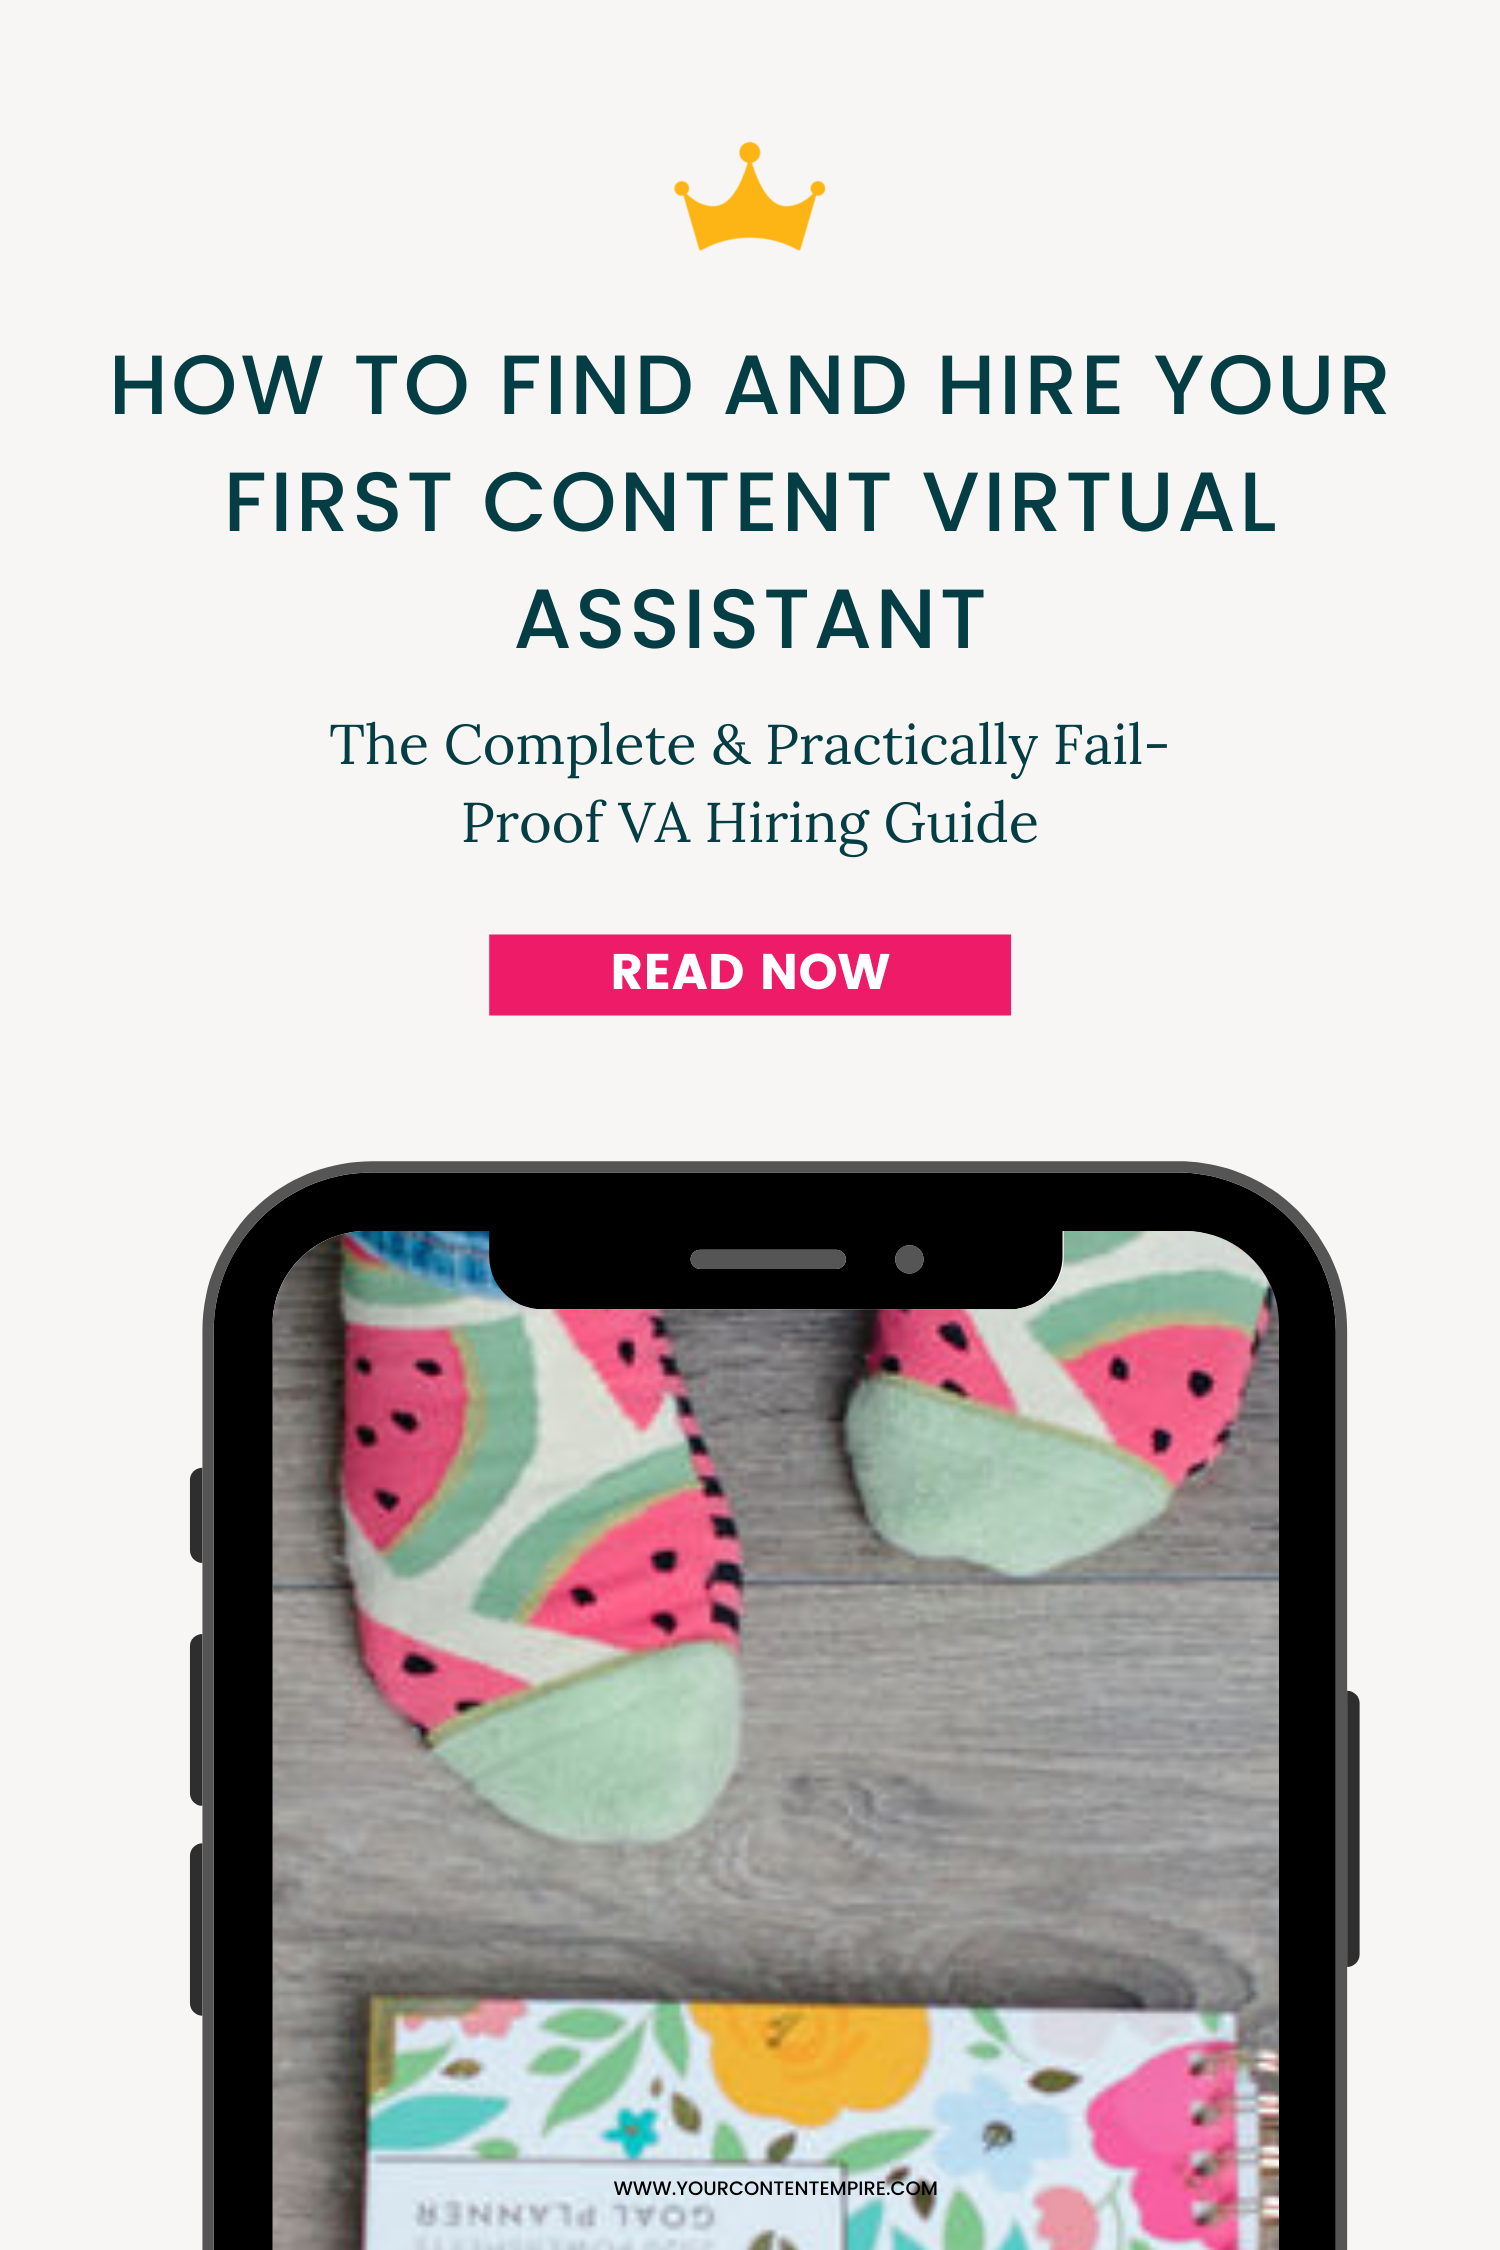 How to Find and Hire Your First Content Virtual Assistant